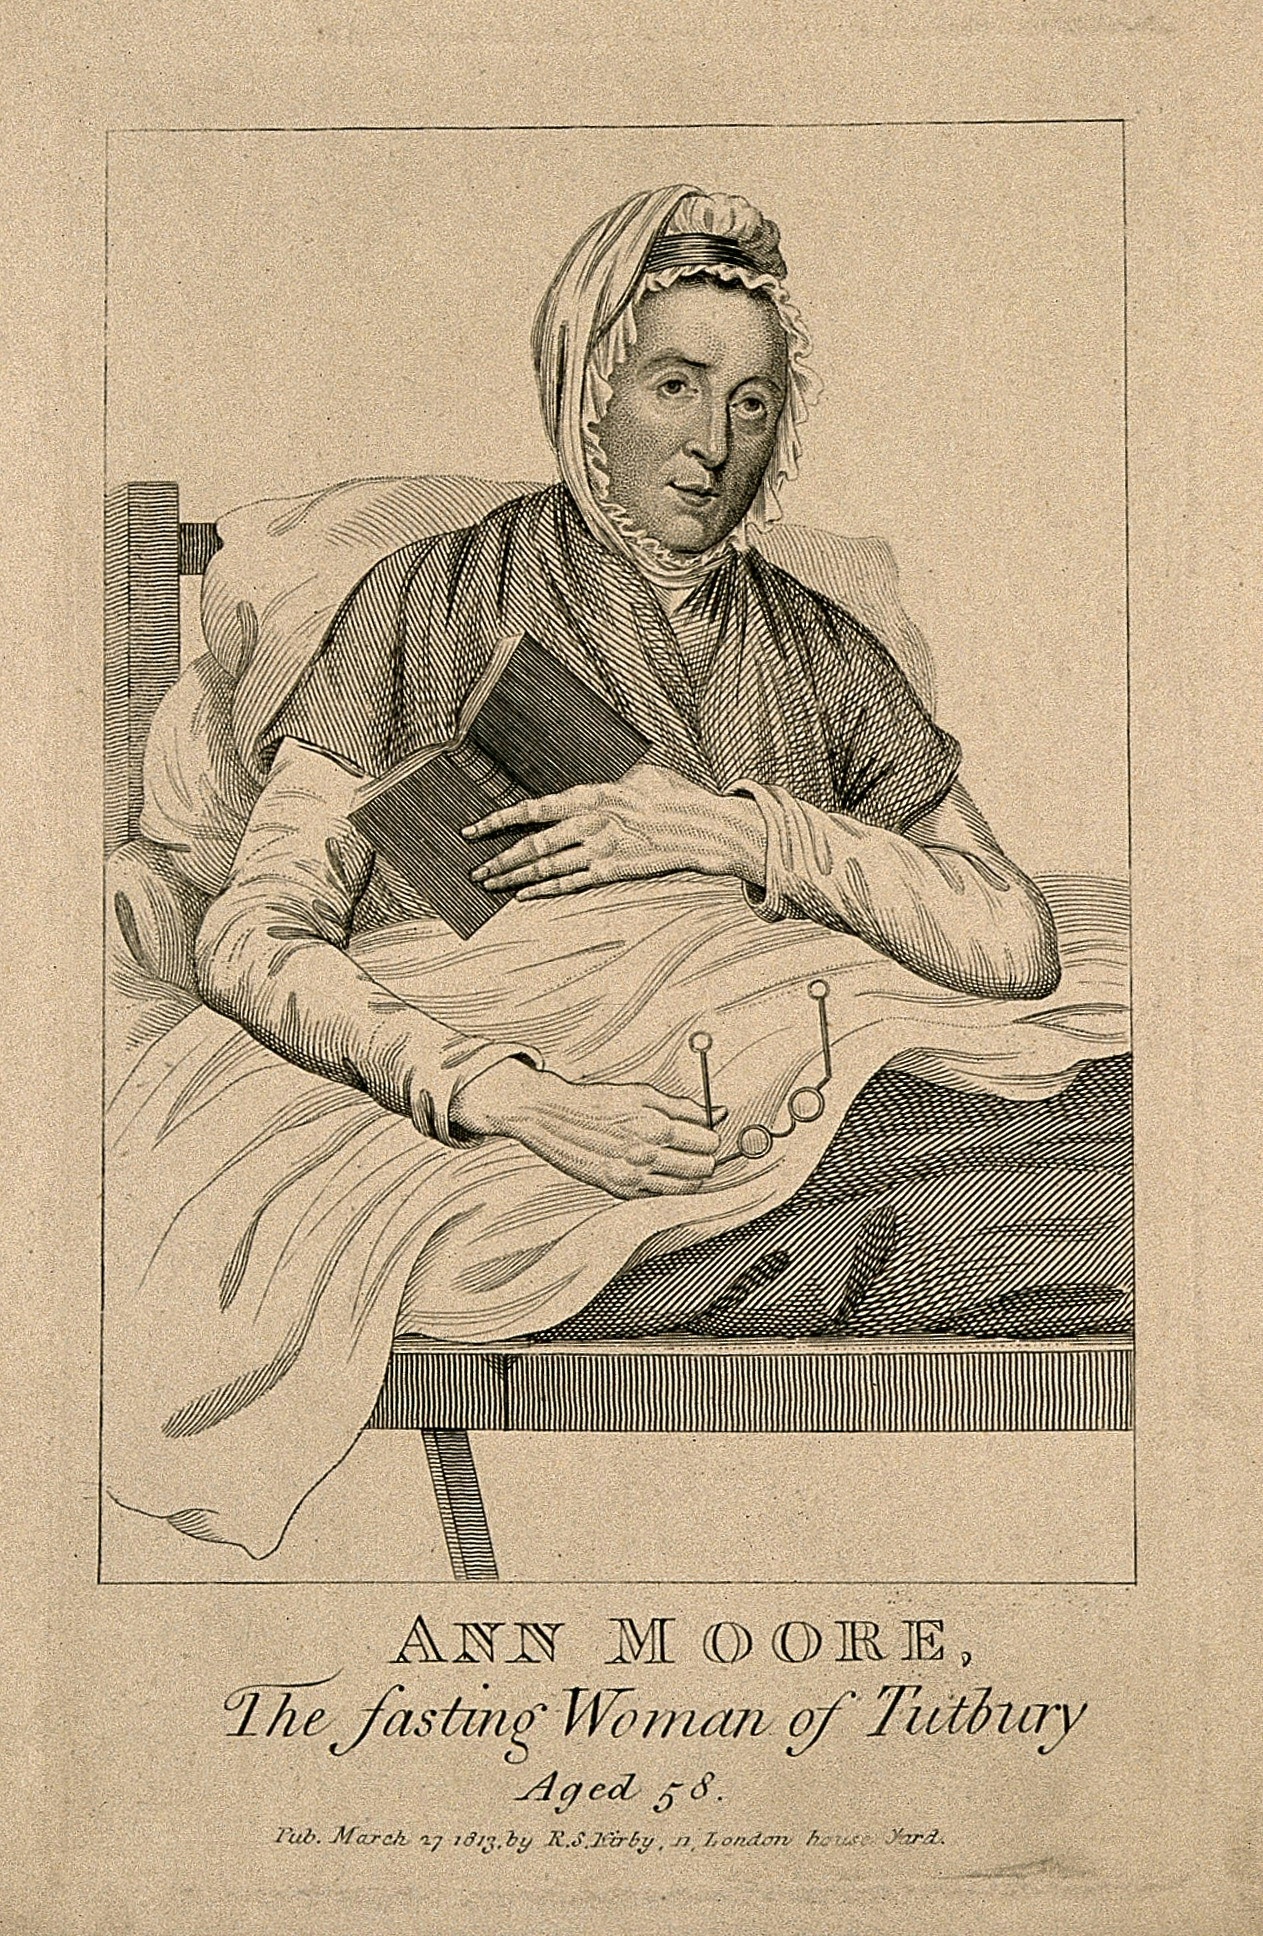 Black and white illustration of a woman sitting up in bed holding a book and a pair of glasses.